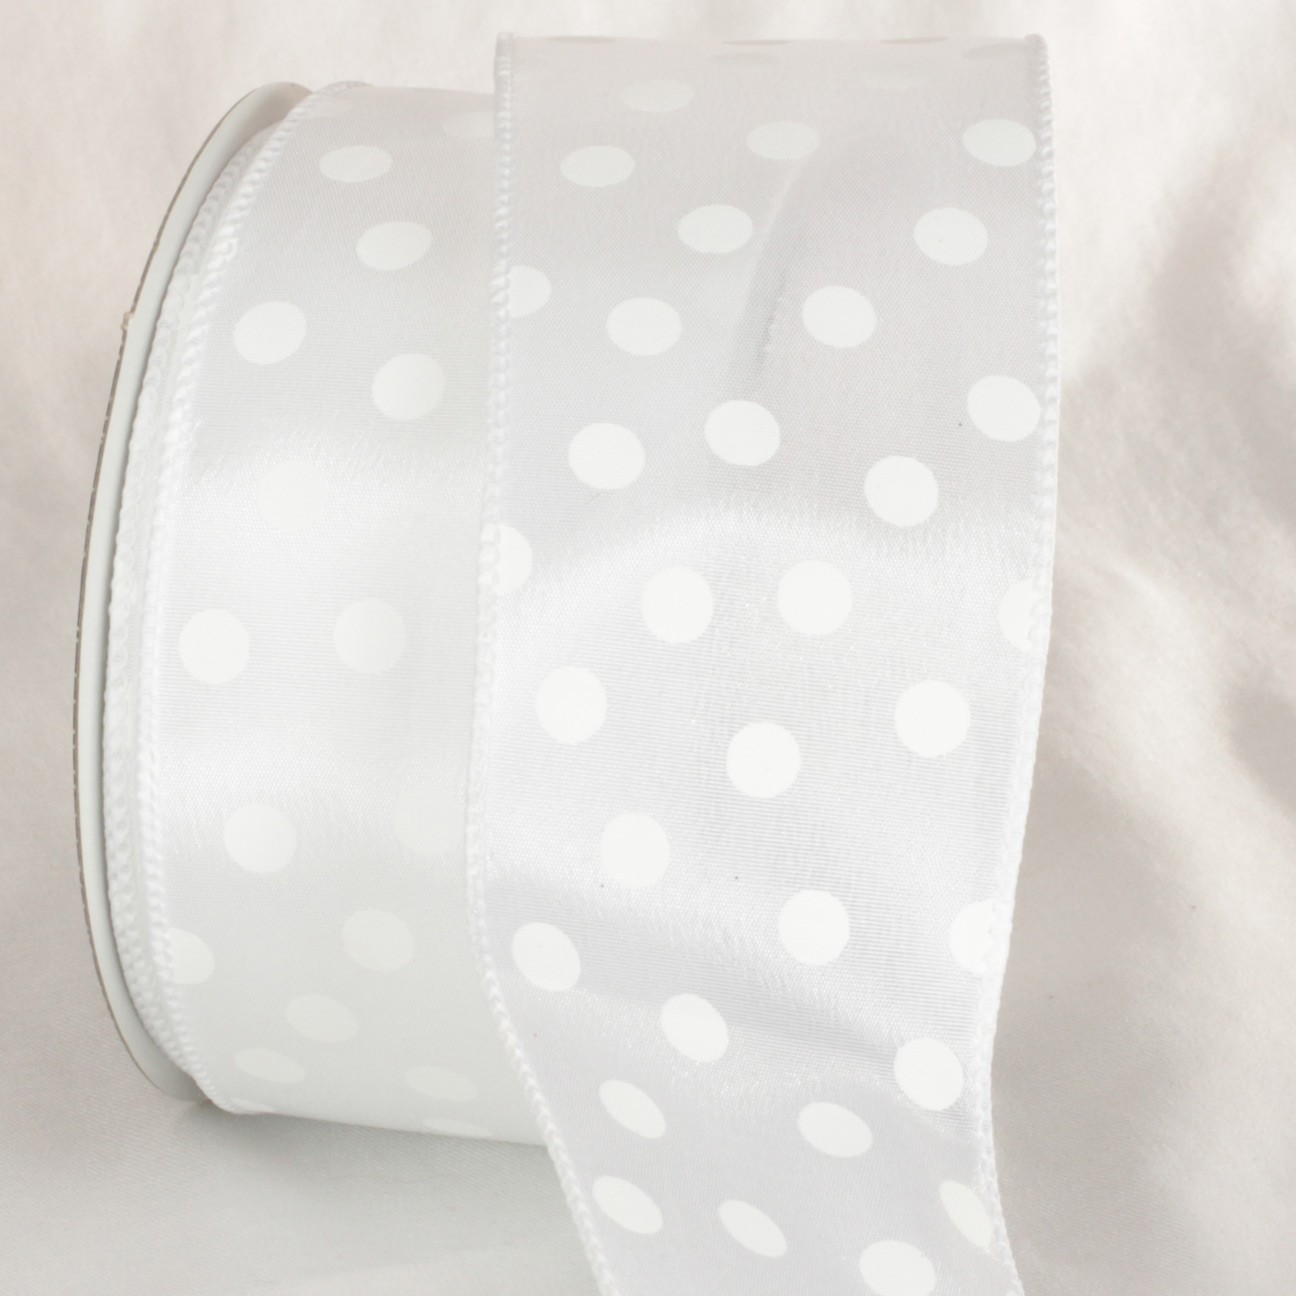 The Ribbon People Snow White Polka Dots Printed Wired Craft Ribbon 2.5" x 40 Yards